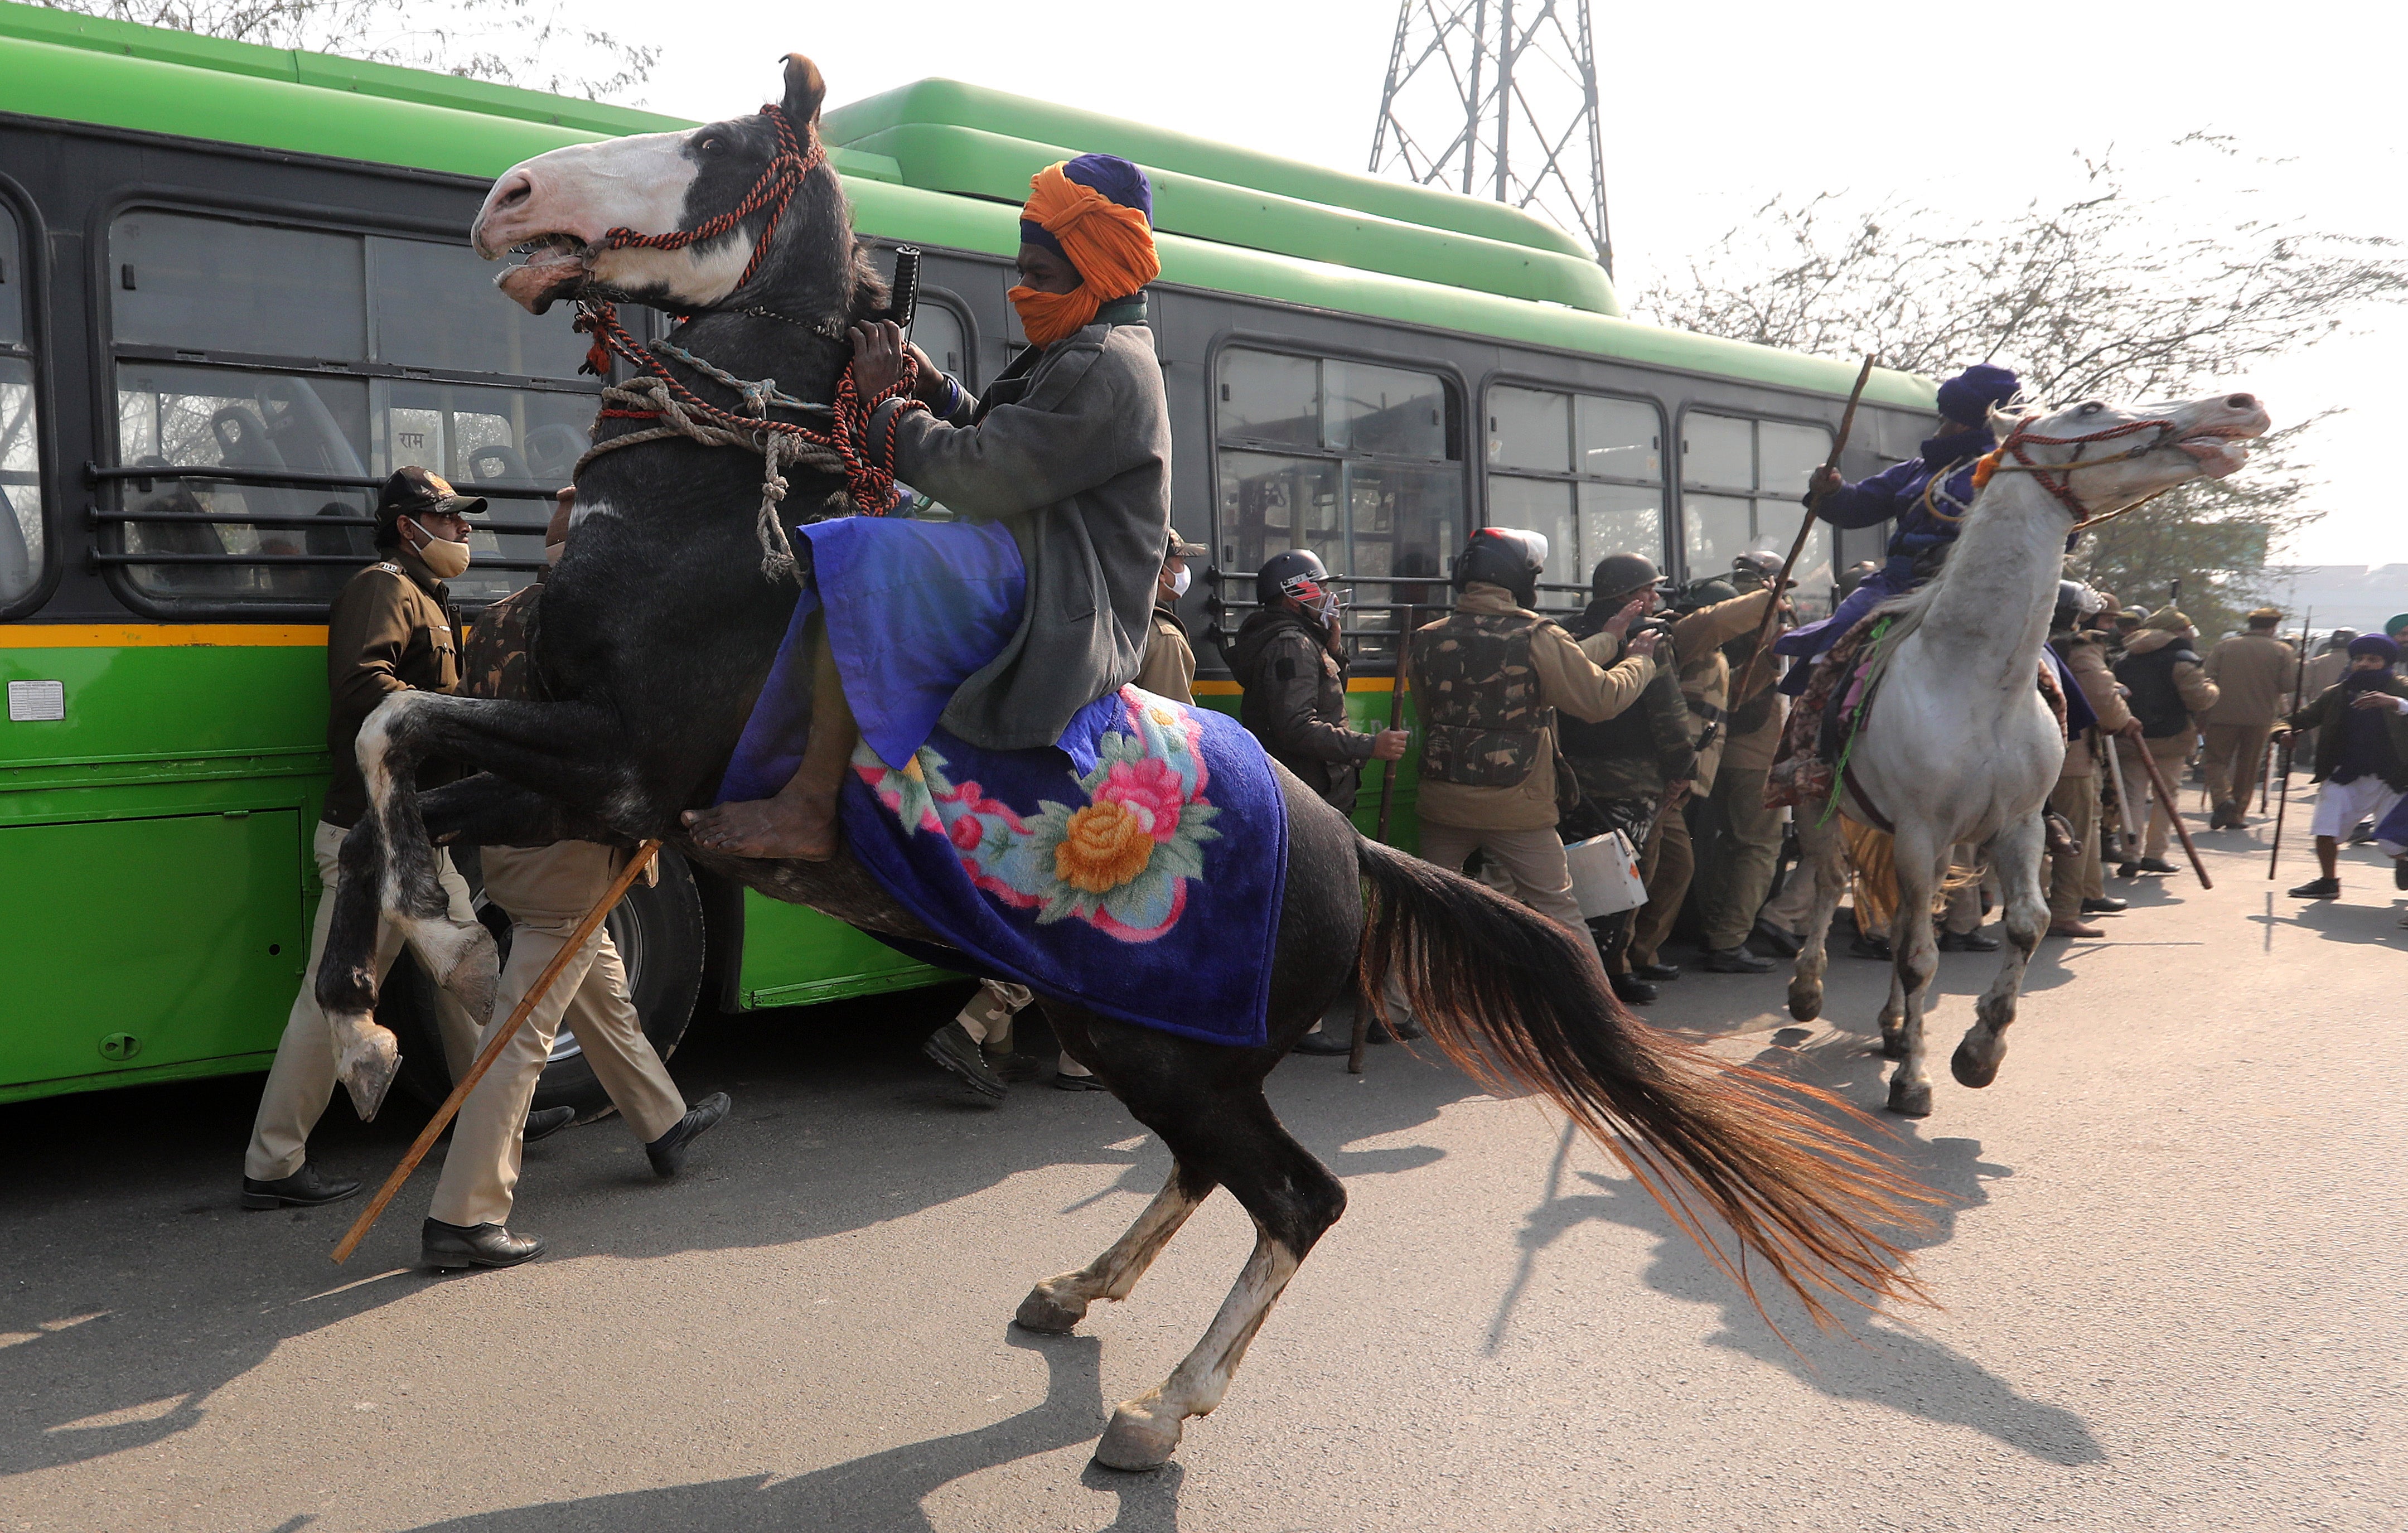 Men belonging to an armed Sikh order clash with police personnel as people take part in a ‘parallel parade’ on tractors and trolleys, during the ongoing farmers protest against new farm laws